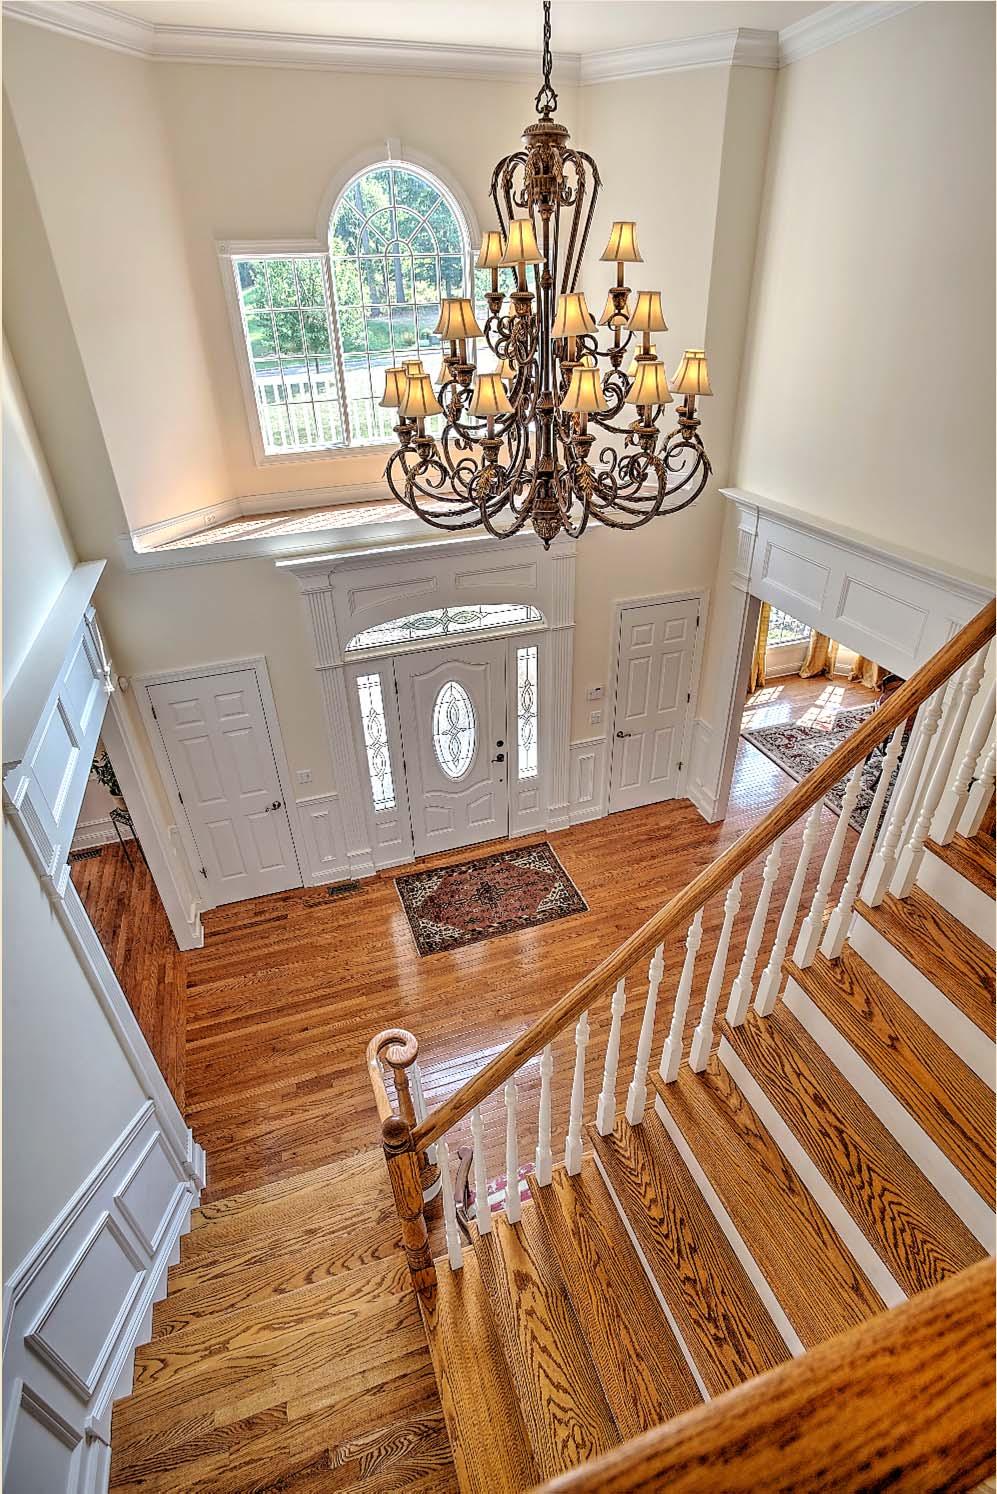 Foyer 16 x 13: East facing, this home enjoys sundrenched mornings from the foyer and front rooms.